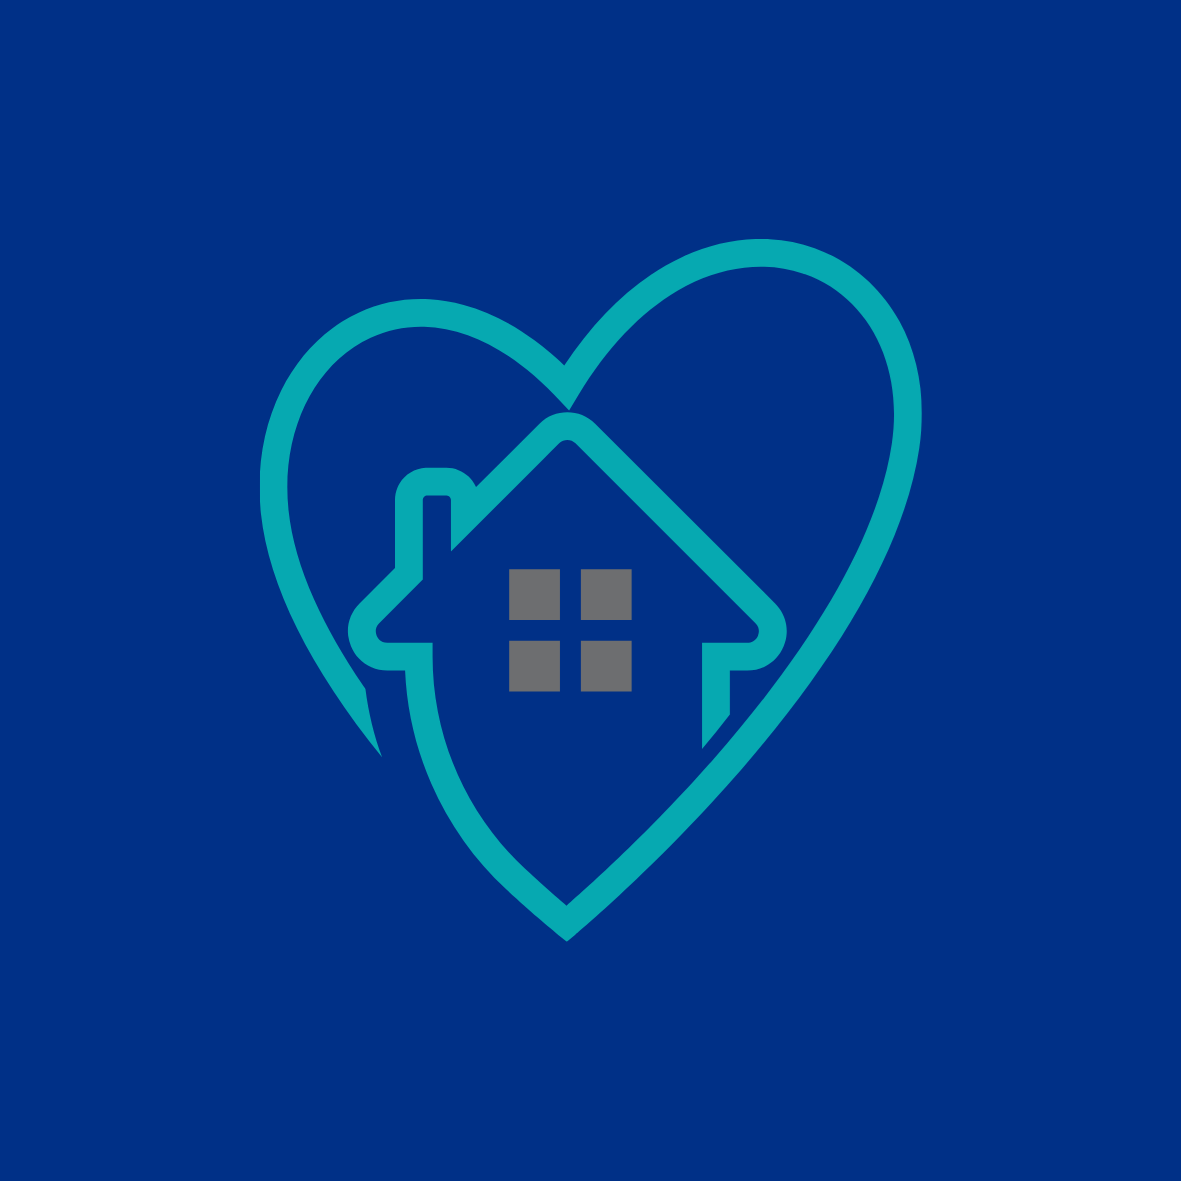 Heart and Home Icon to Depict Hare Home Assessment Team